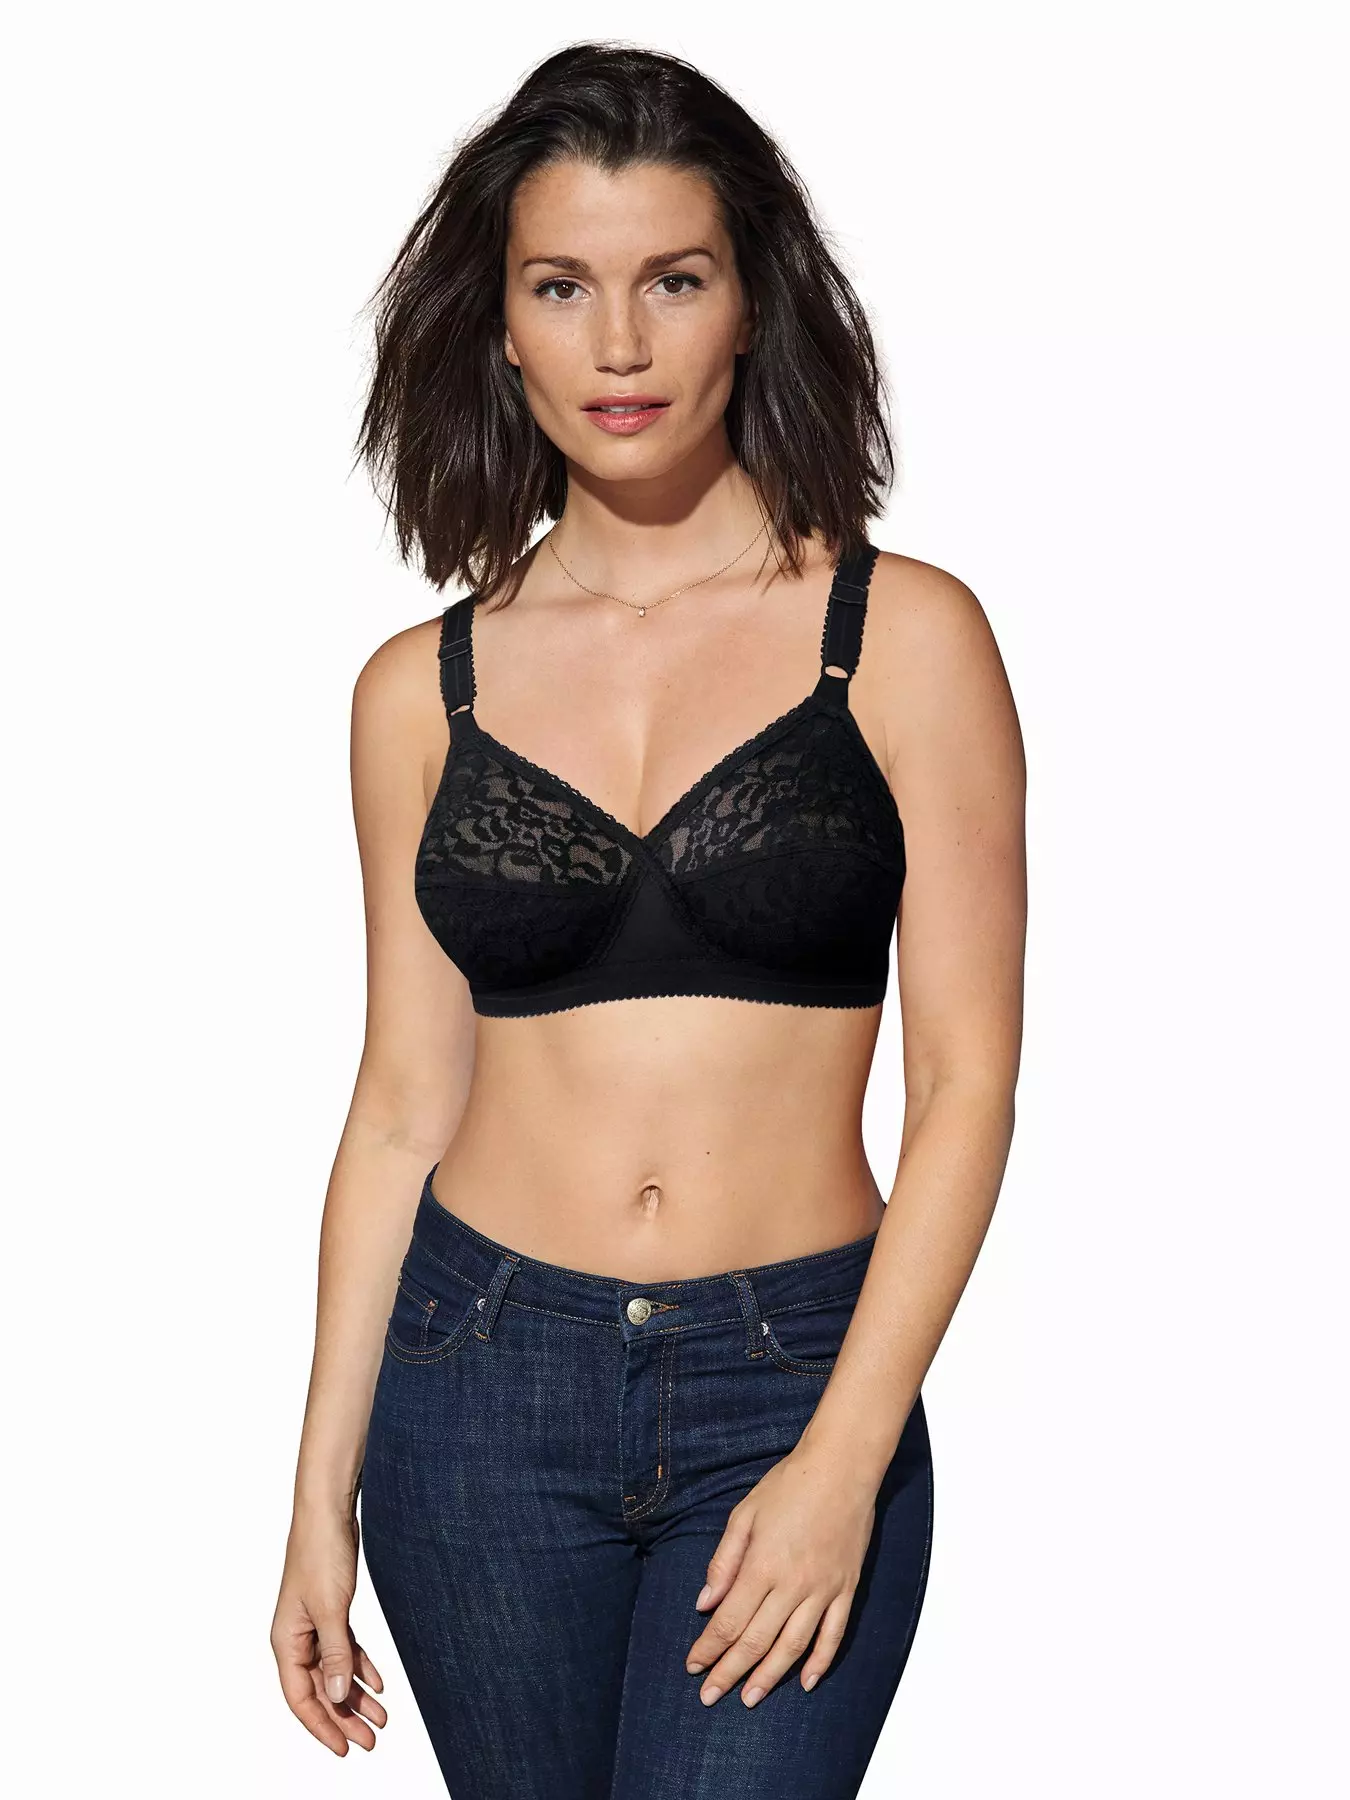 Full Cup Bra, Soft Minimiser, Without Underwire, with Lace, Large Sizes,  Wide Straps, Laminated Cotton, Soft, Stable Support, Large Breasts